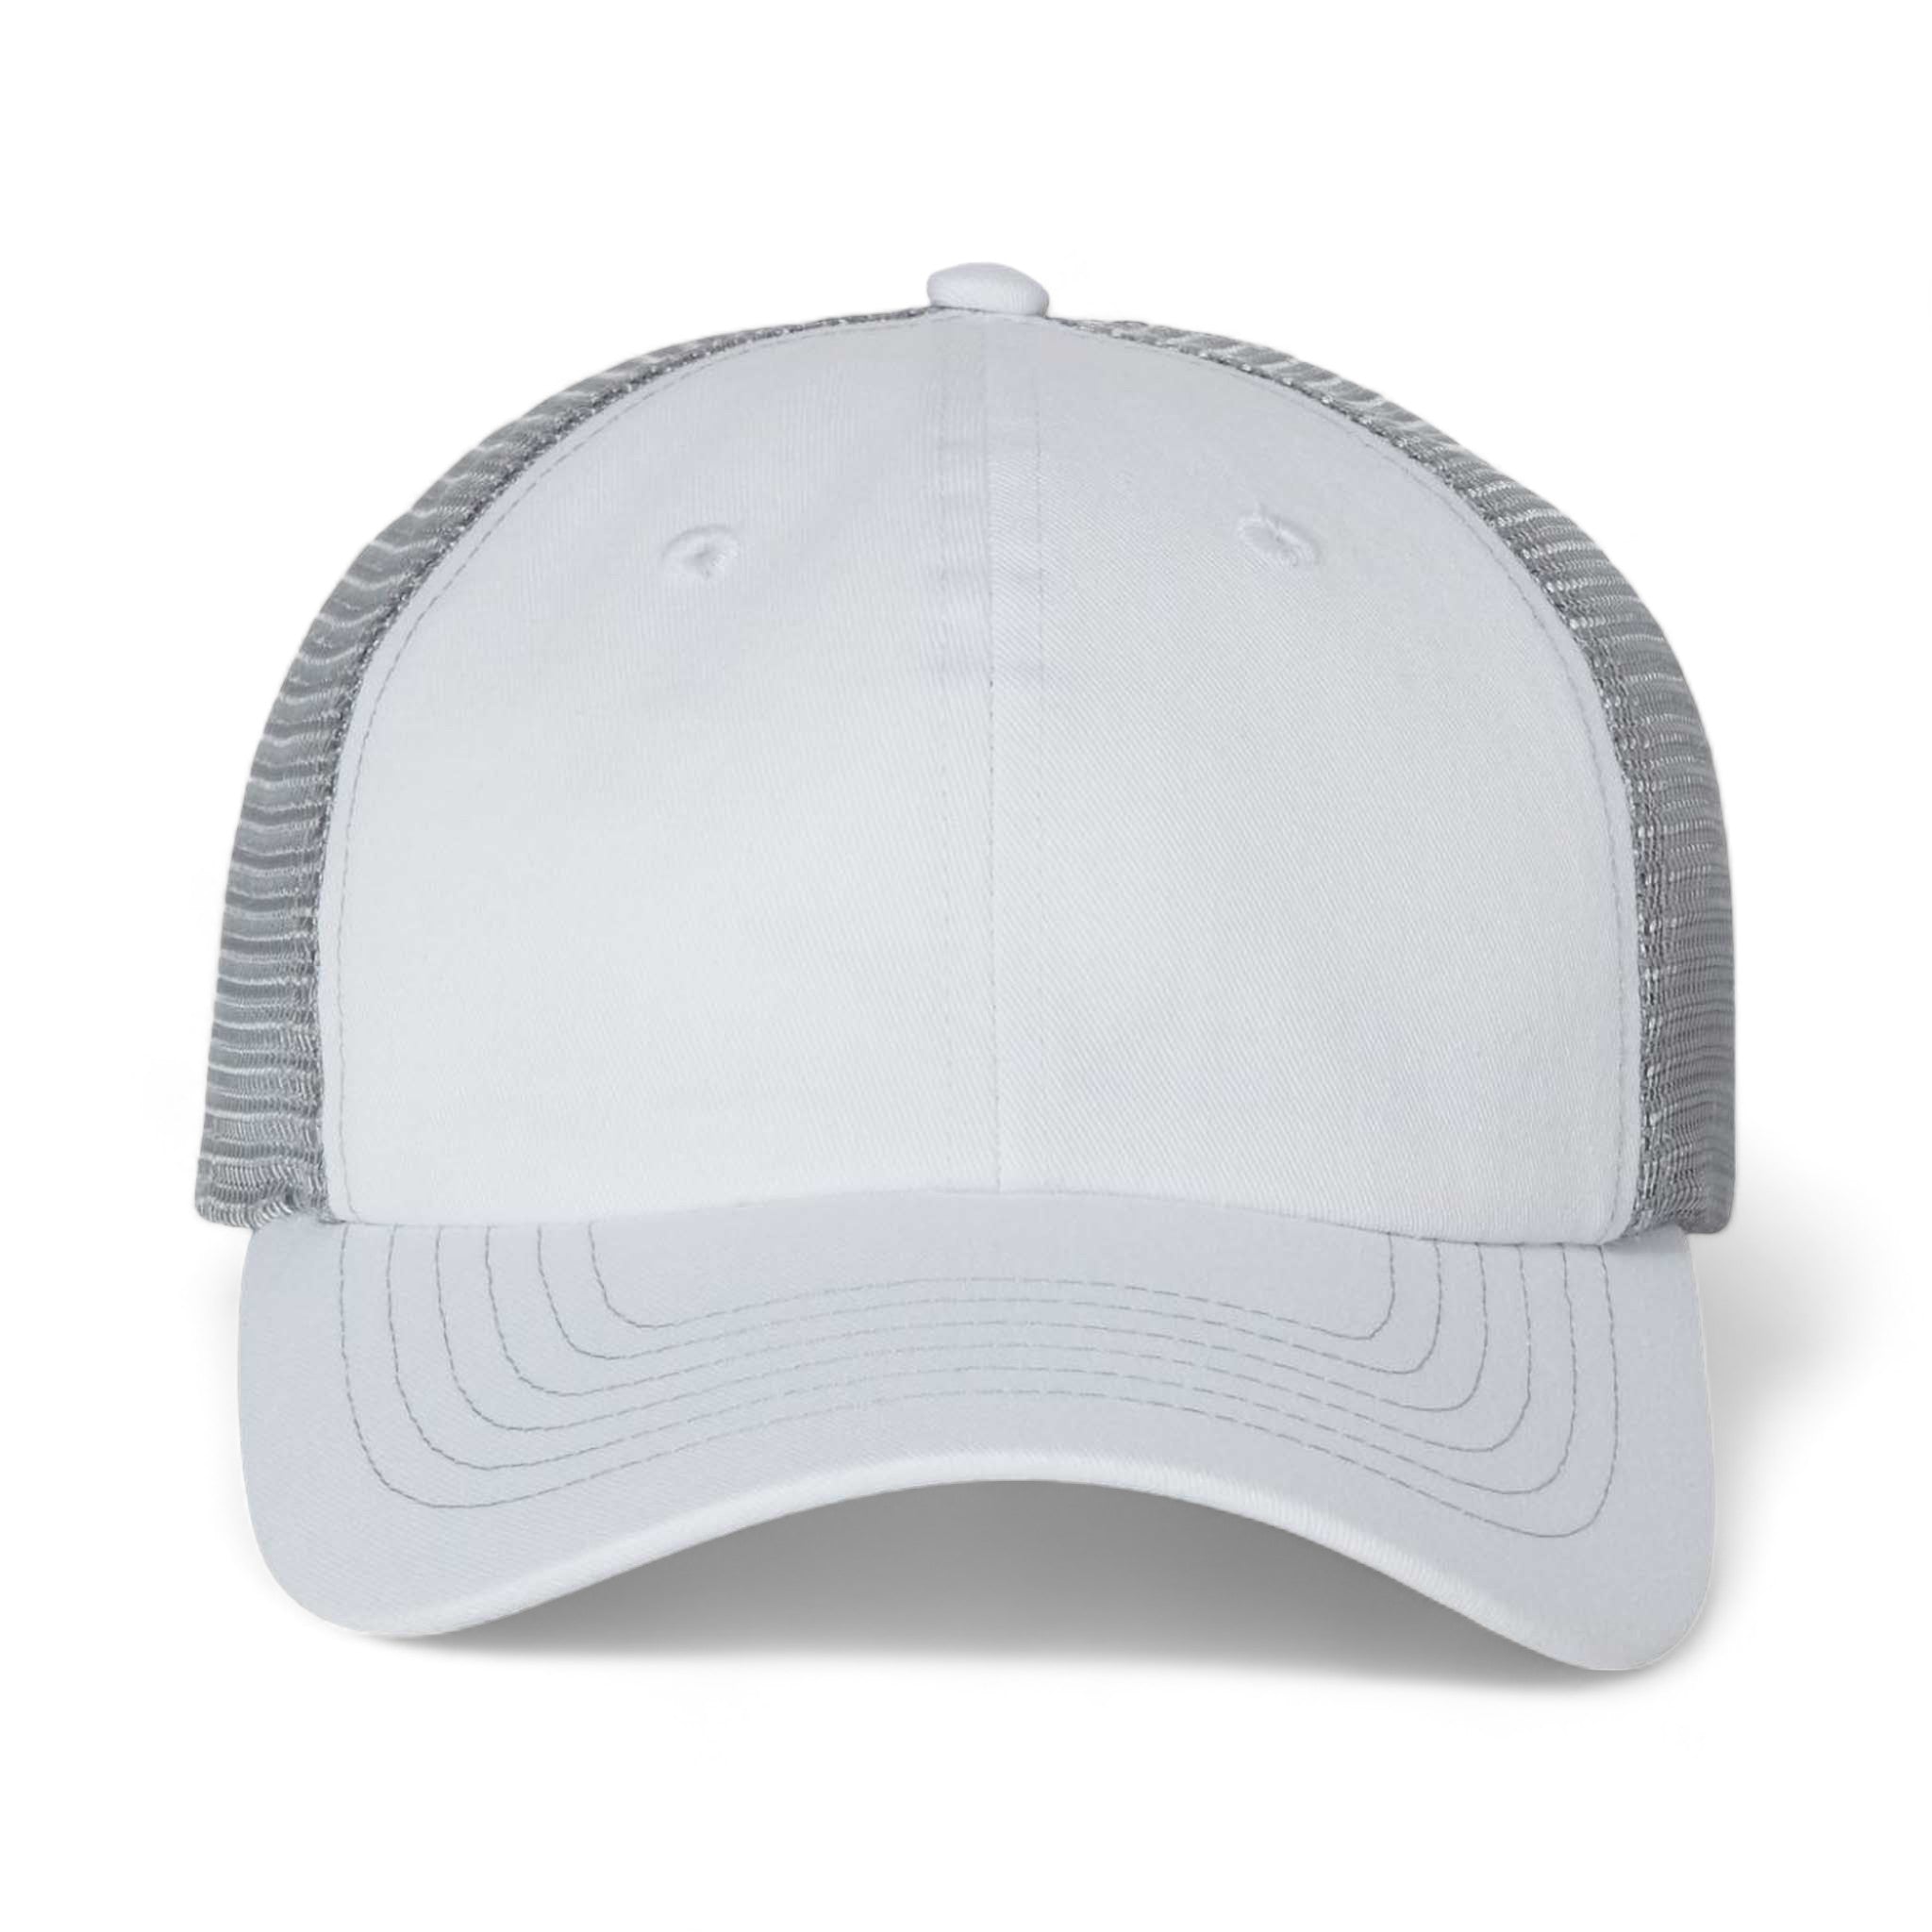 Front view of Sportsman 3100 custom hat in white and grey